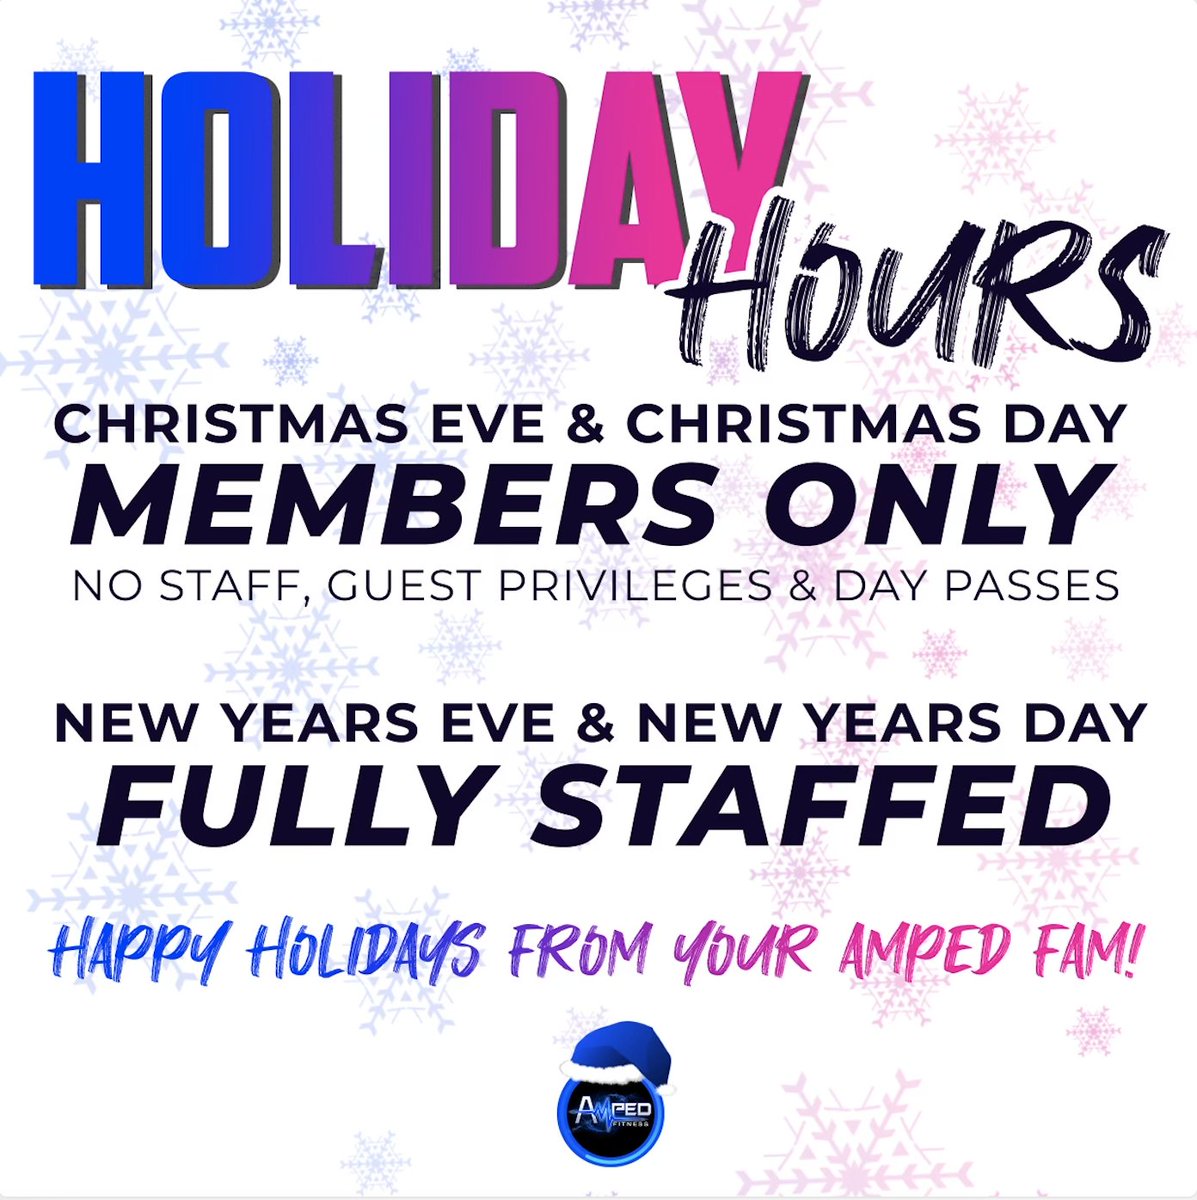 HOLIDAY HOURS! 🎄

As always, we will be open for 24/7 member-only access through OpenPath. If you visit over the weekend, make sure to tag us in your post-sweat sesh pics! 📸 #XMASATAMPED

Happy Holidays! See you soon!